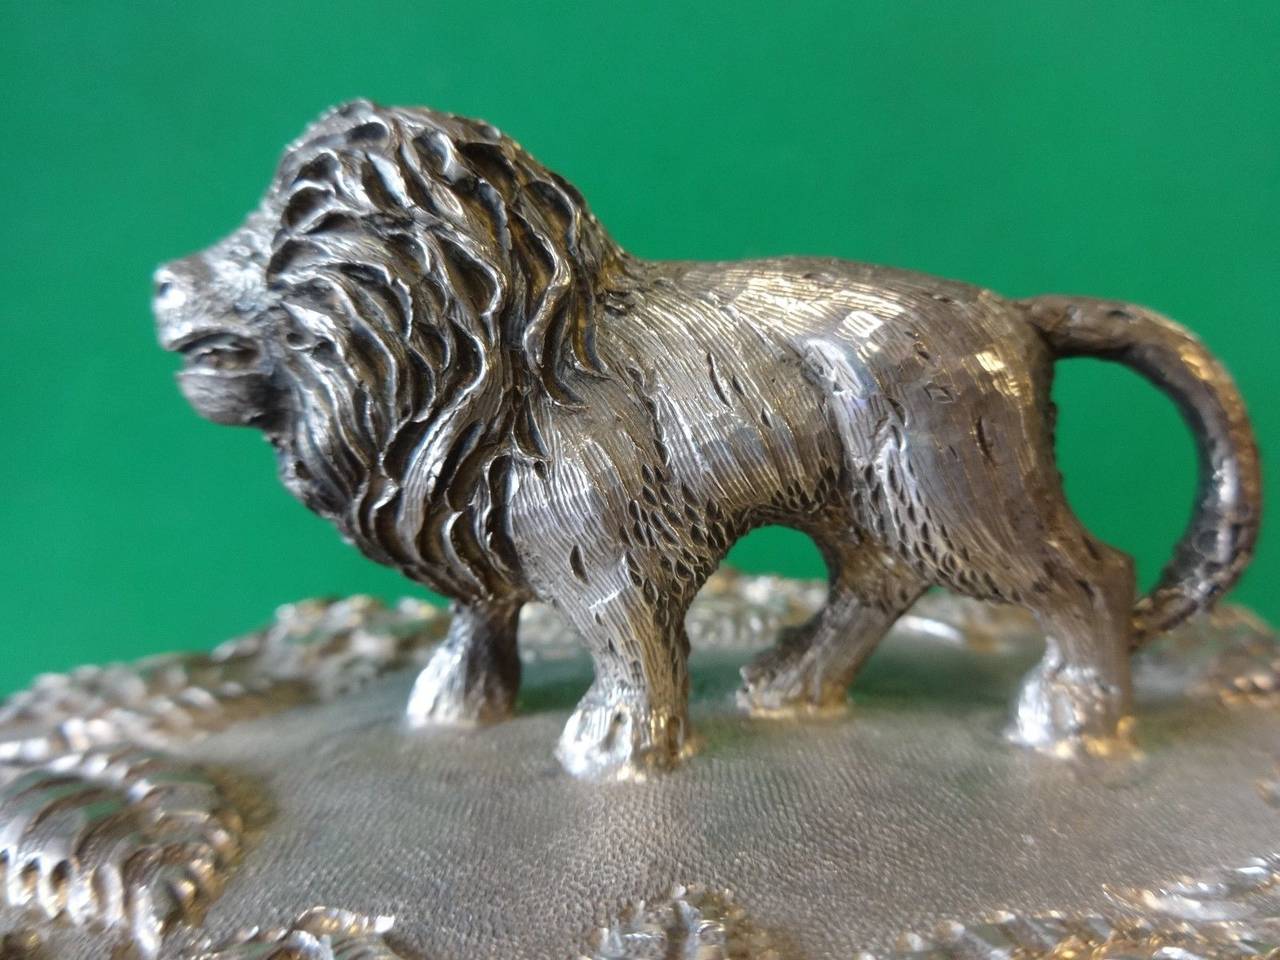 Impressive Baltimore rose by Schofield casserole dish with cover featuring an applied 3-D lion. The piece has the original ironstone liner. There is a repoussed monogram worked into the design that reads 